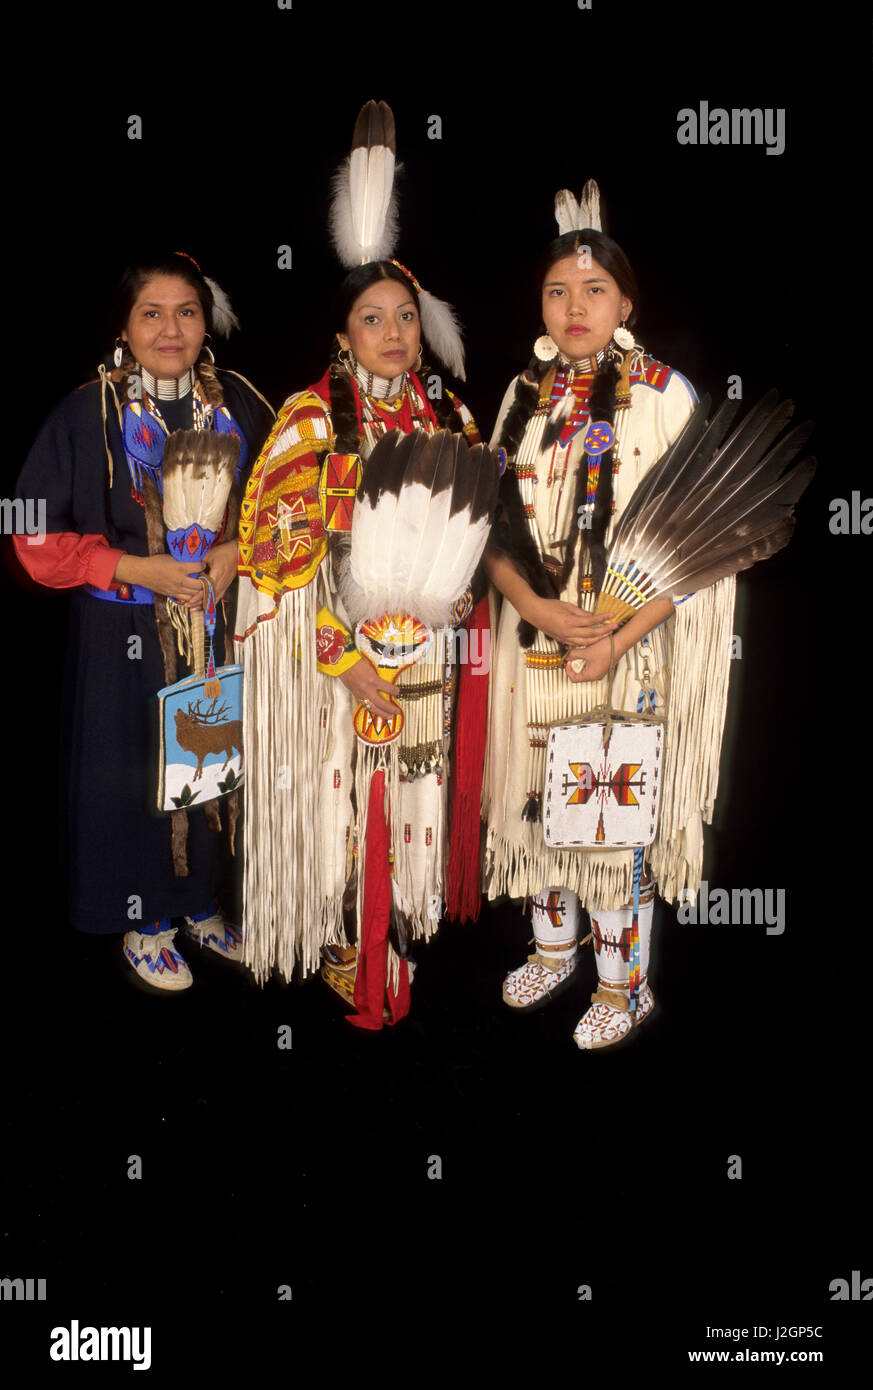 Native American family of mother in a trade cloth dress with teenage daughter who is dressed in traditional regalia and a woman who is a sister and auntie. (MR) Stock Photo